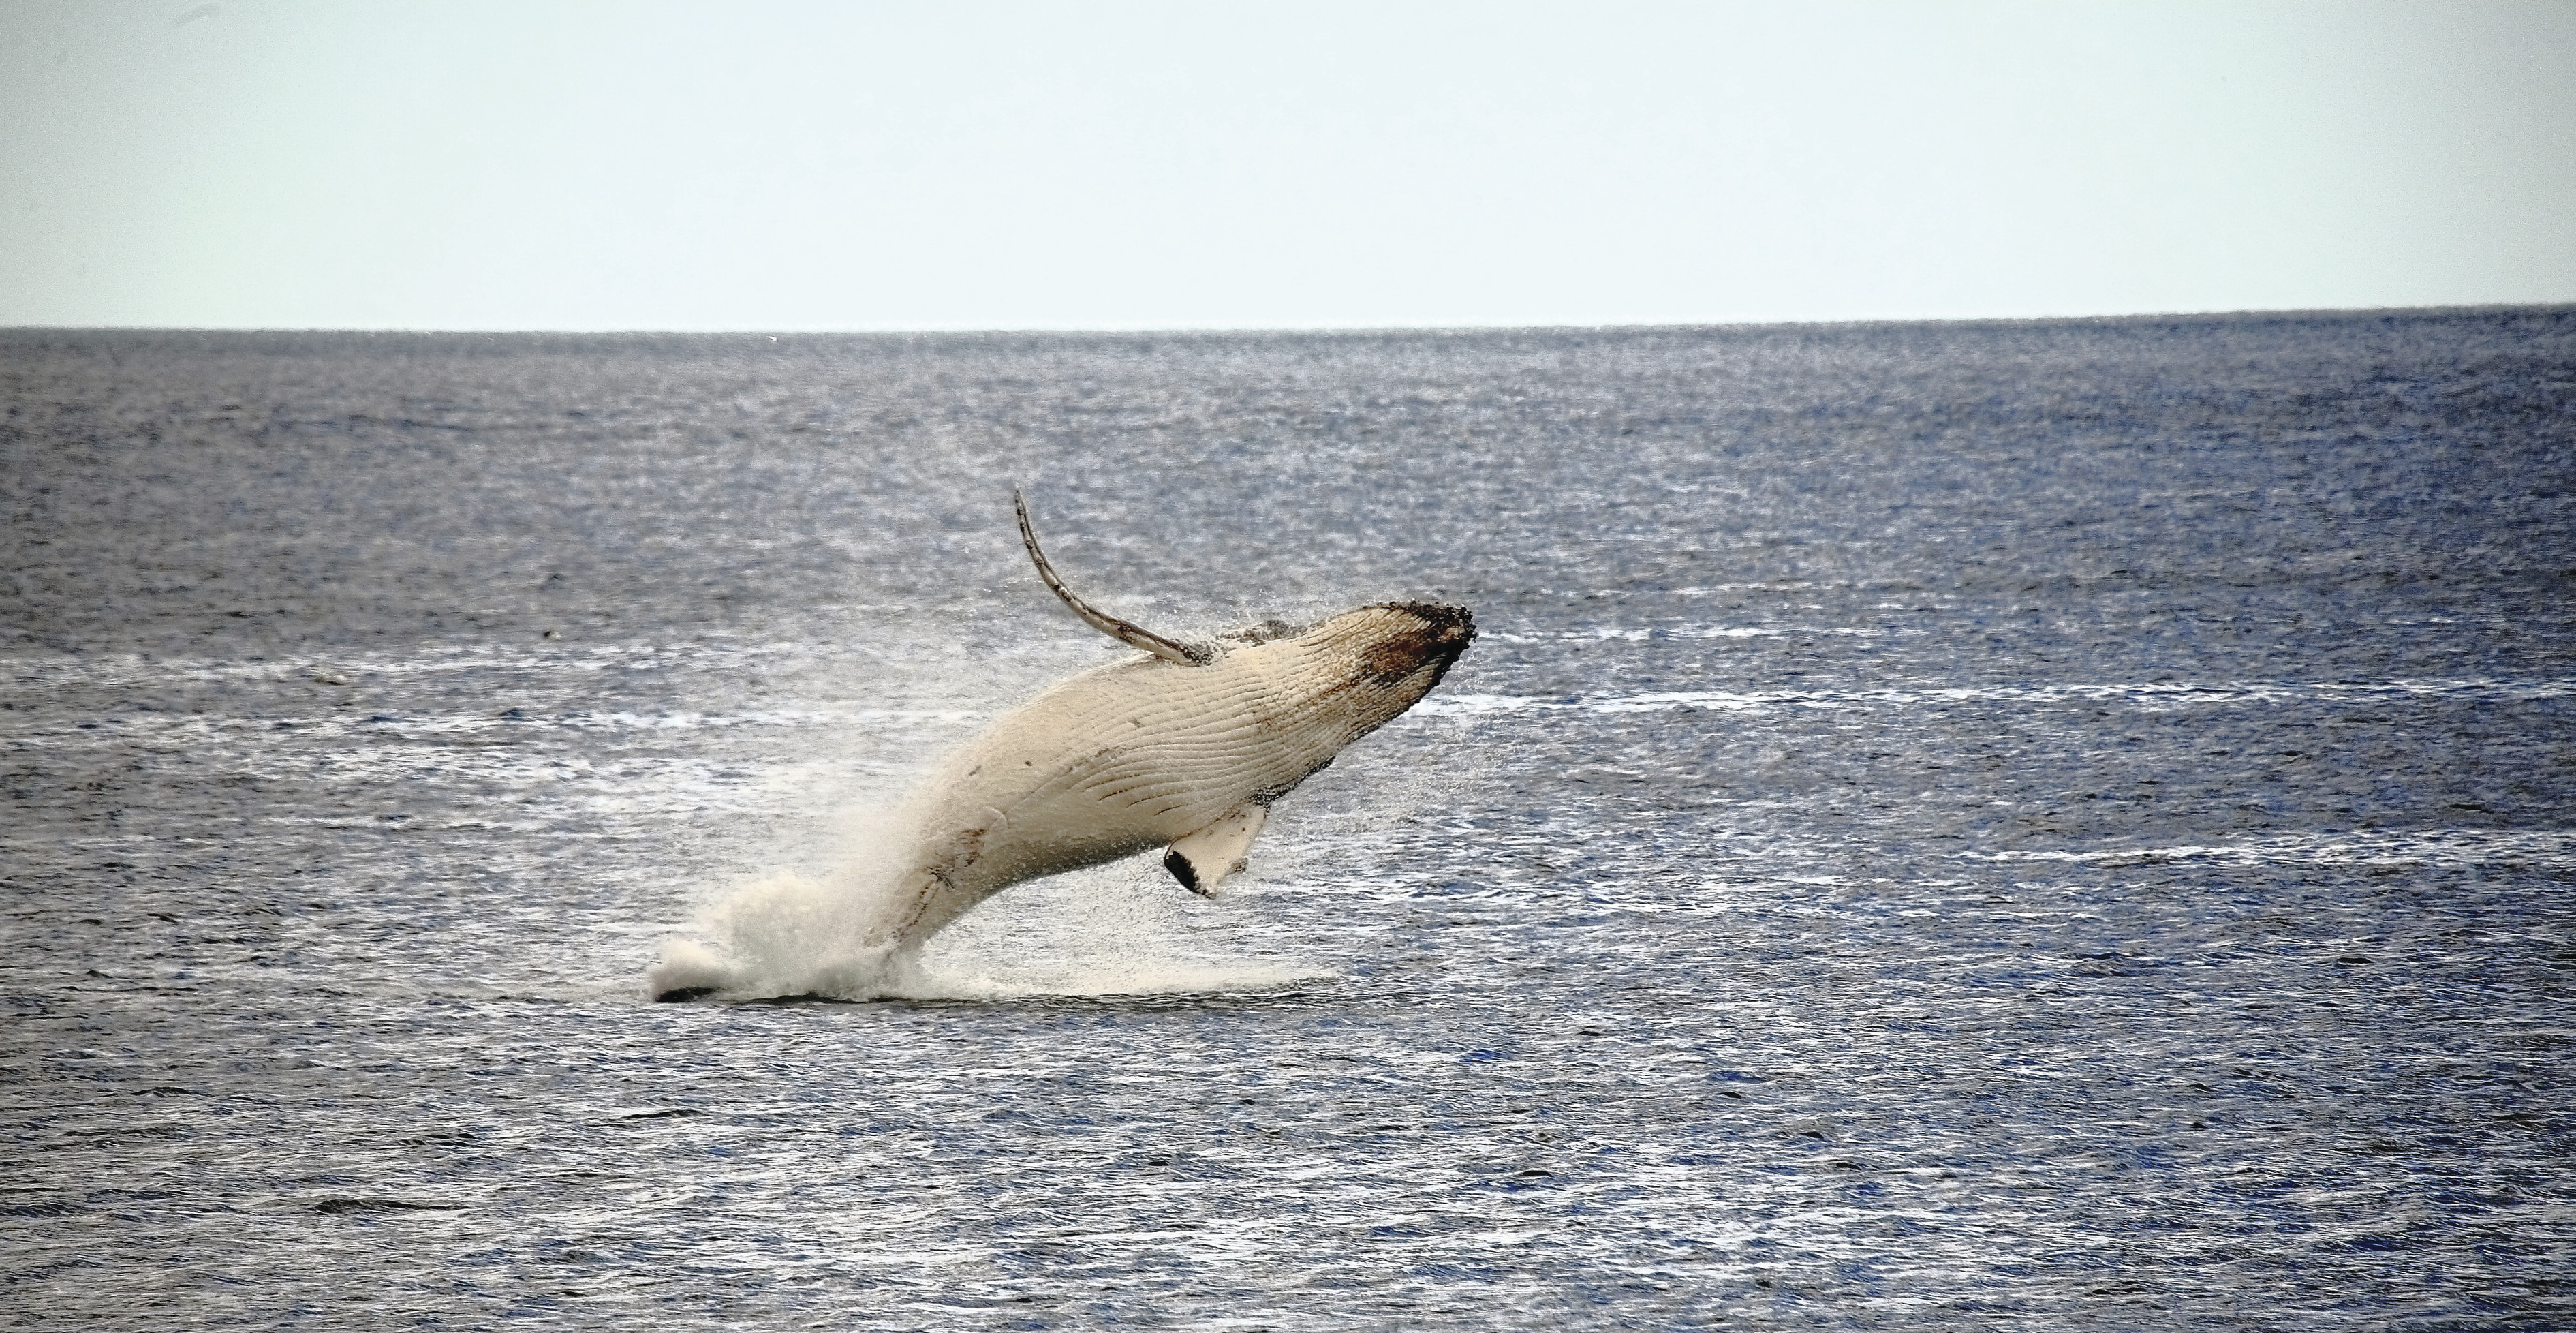 A Humpback Whale calf breaching the water in Bechino. Horizon line behind. 